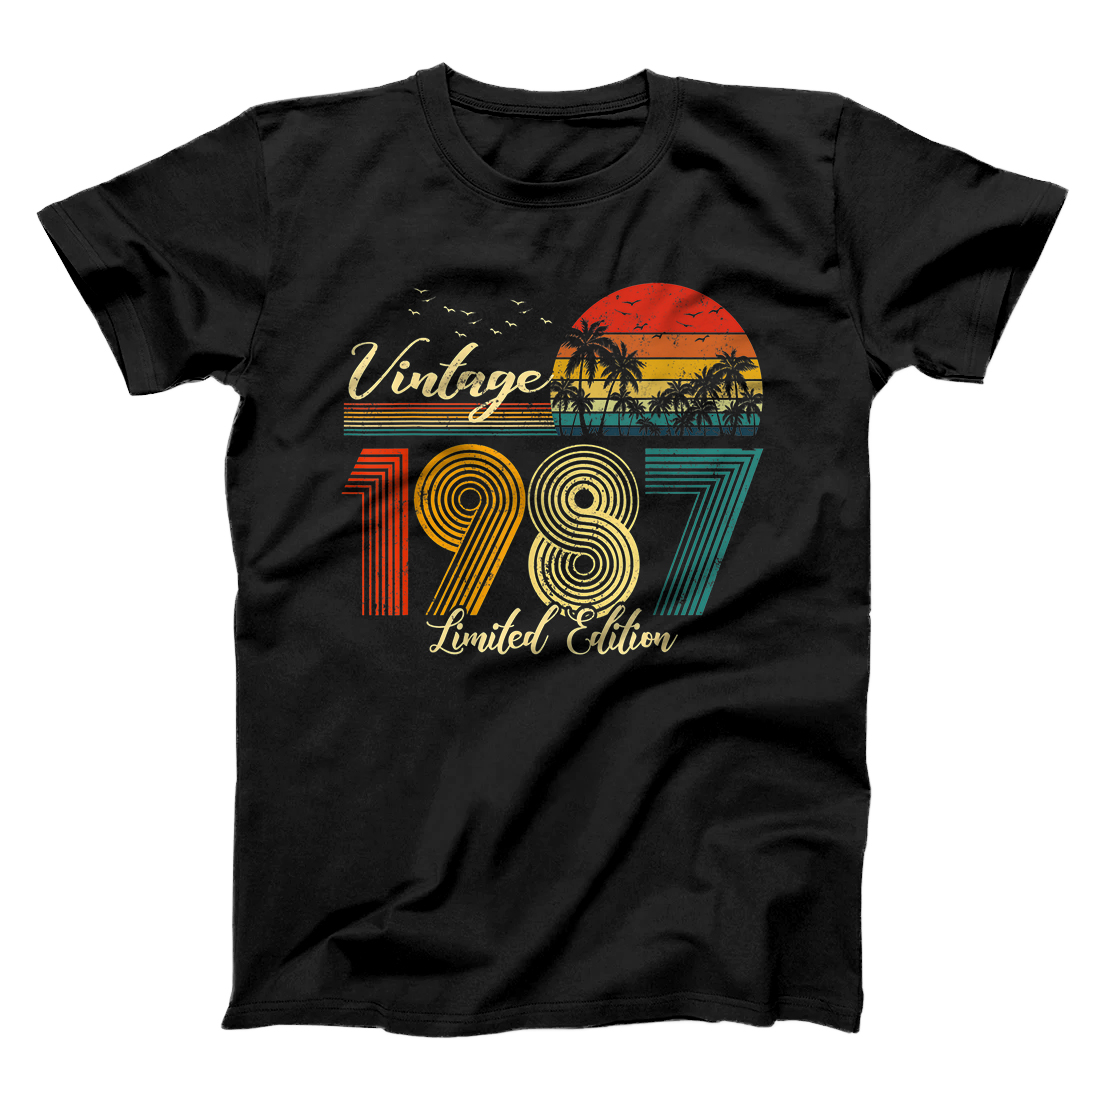 Personalized Vintage 1987 T-Shirt Limited Edition Men Women - 33 Birthday T-Shirt